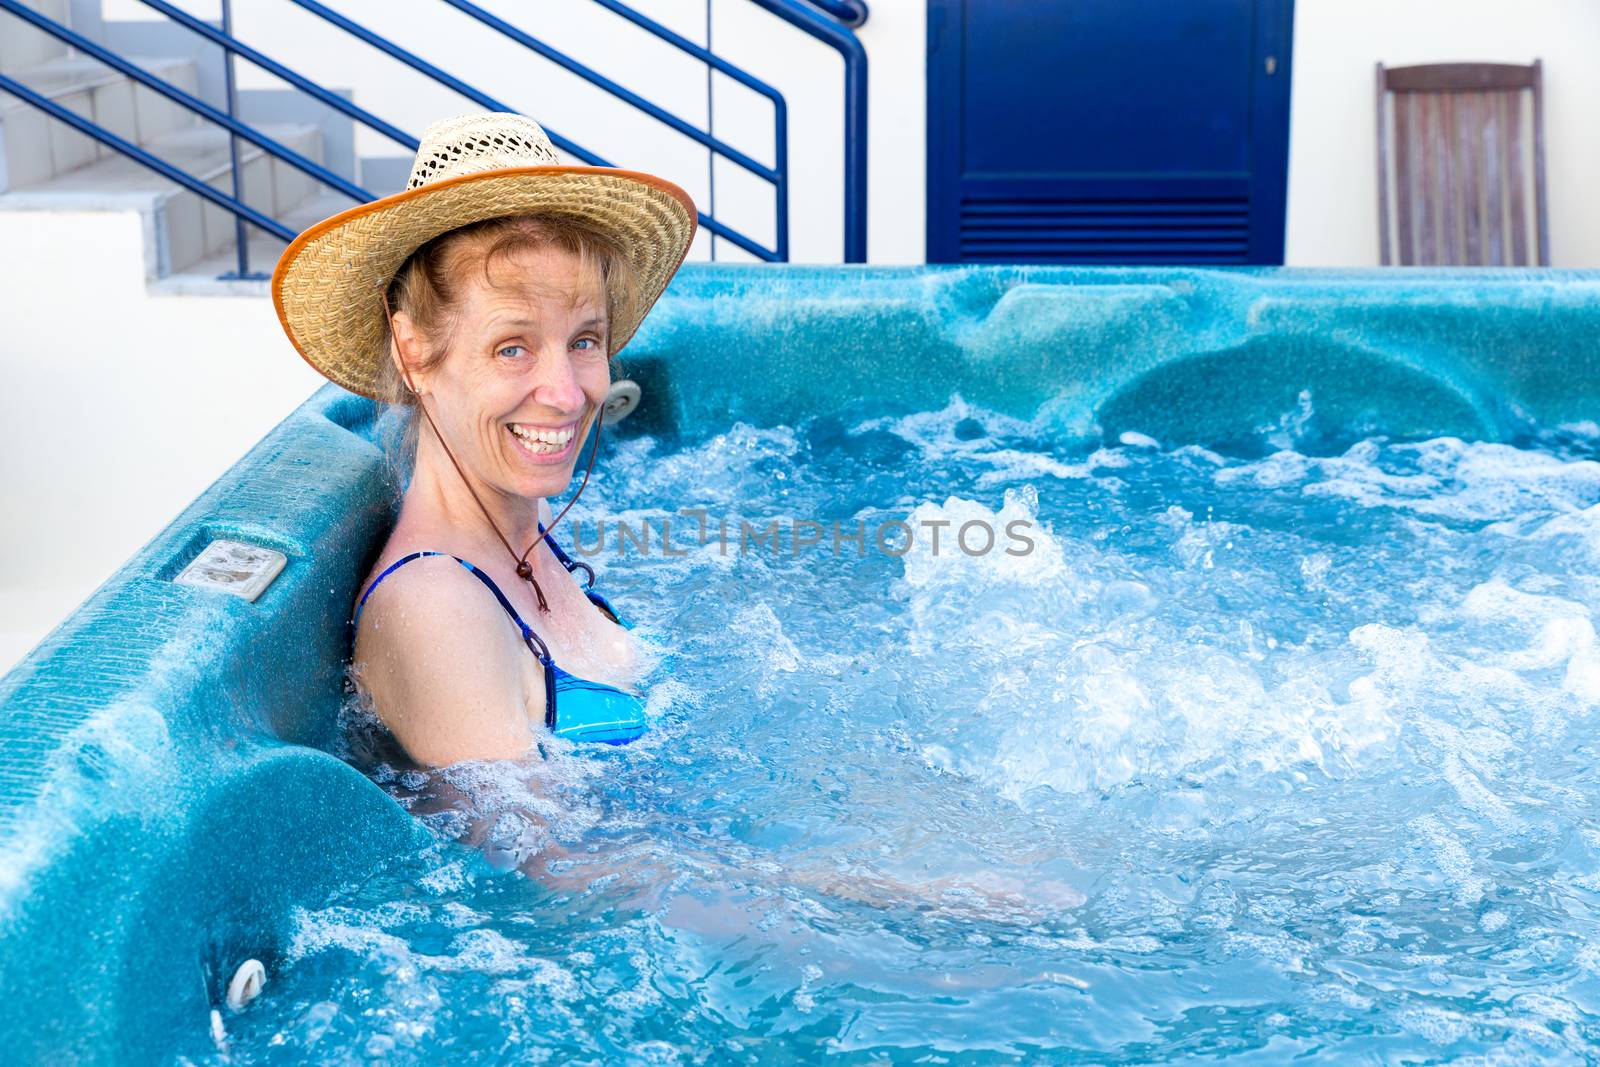 Middle aged woman bathing in hot tub by BenSchonewille